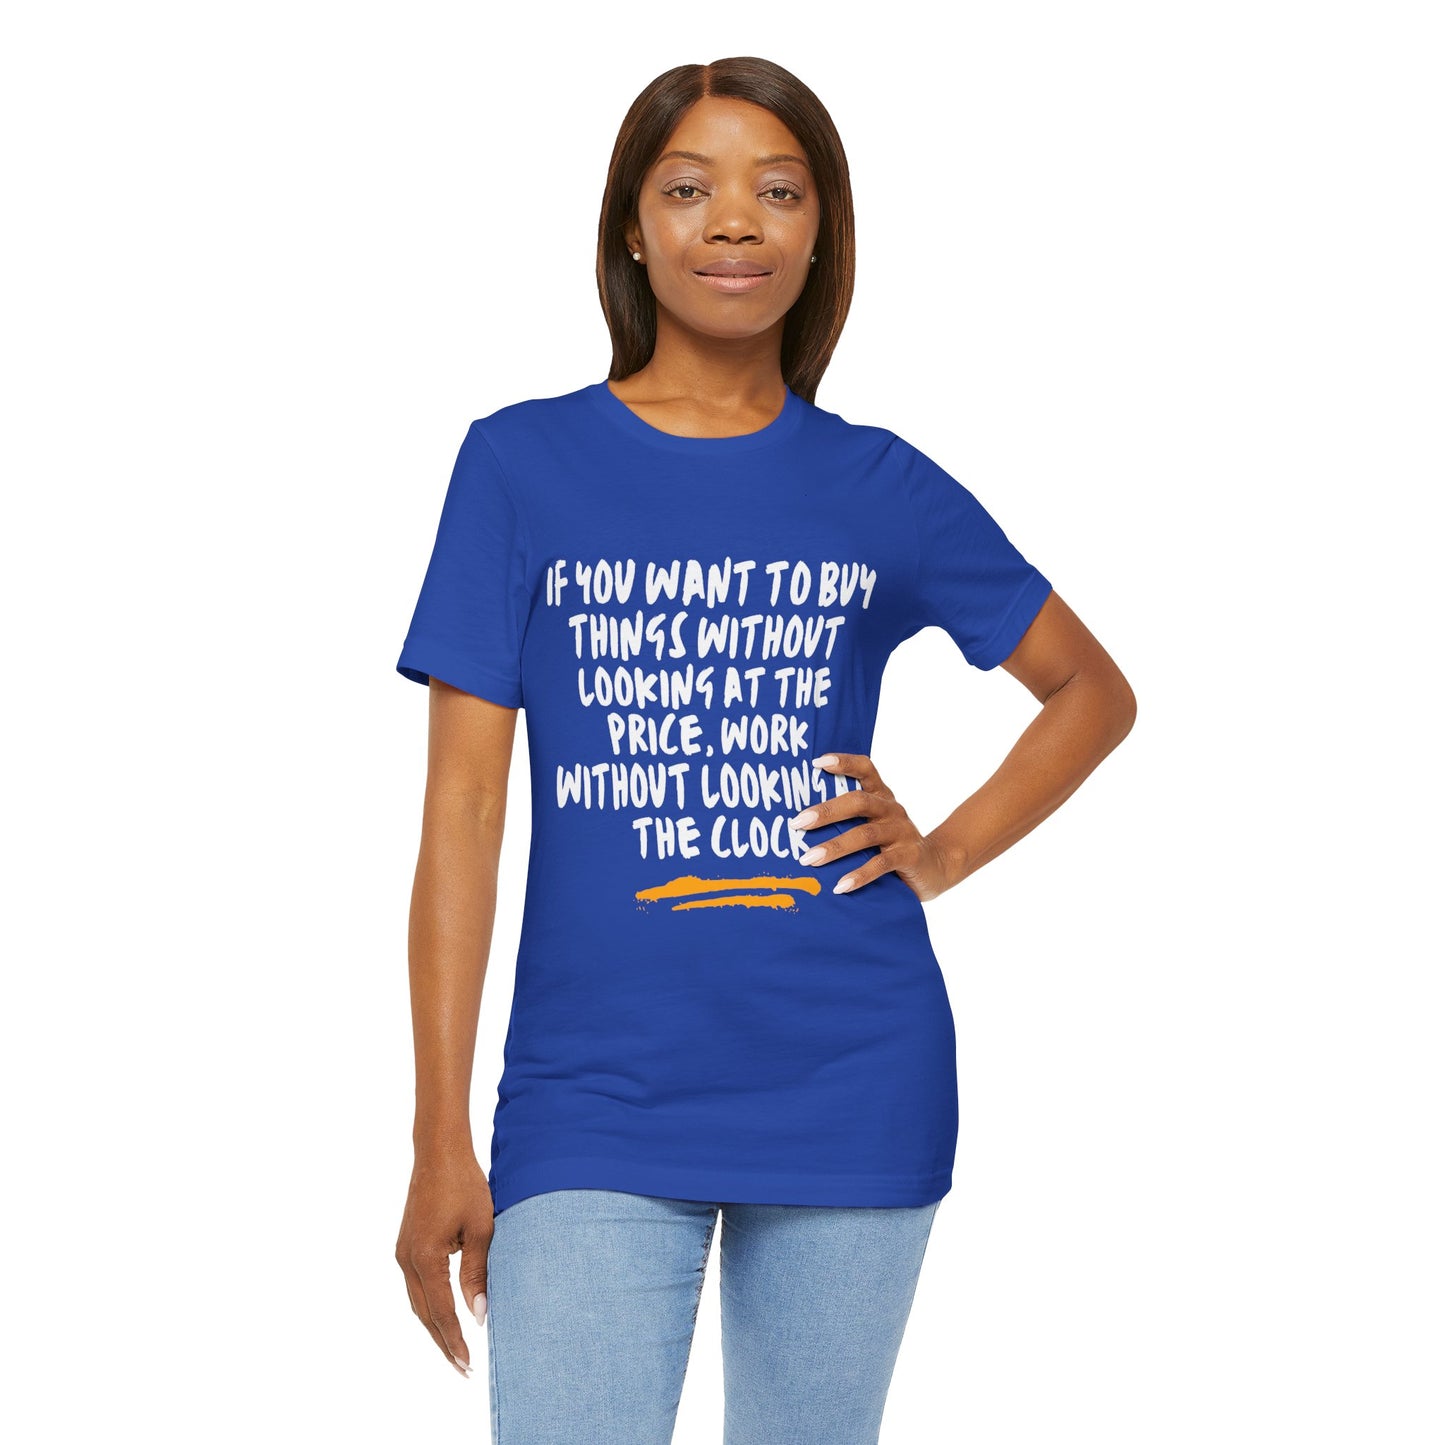 Work without looking at the clock T-shirt - Dark Colors